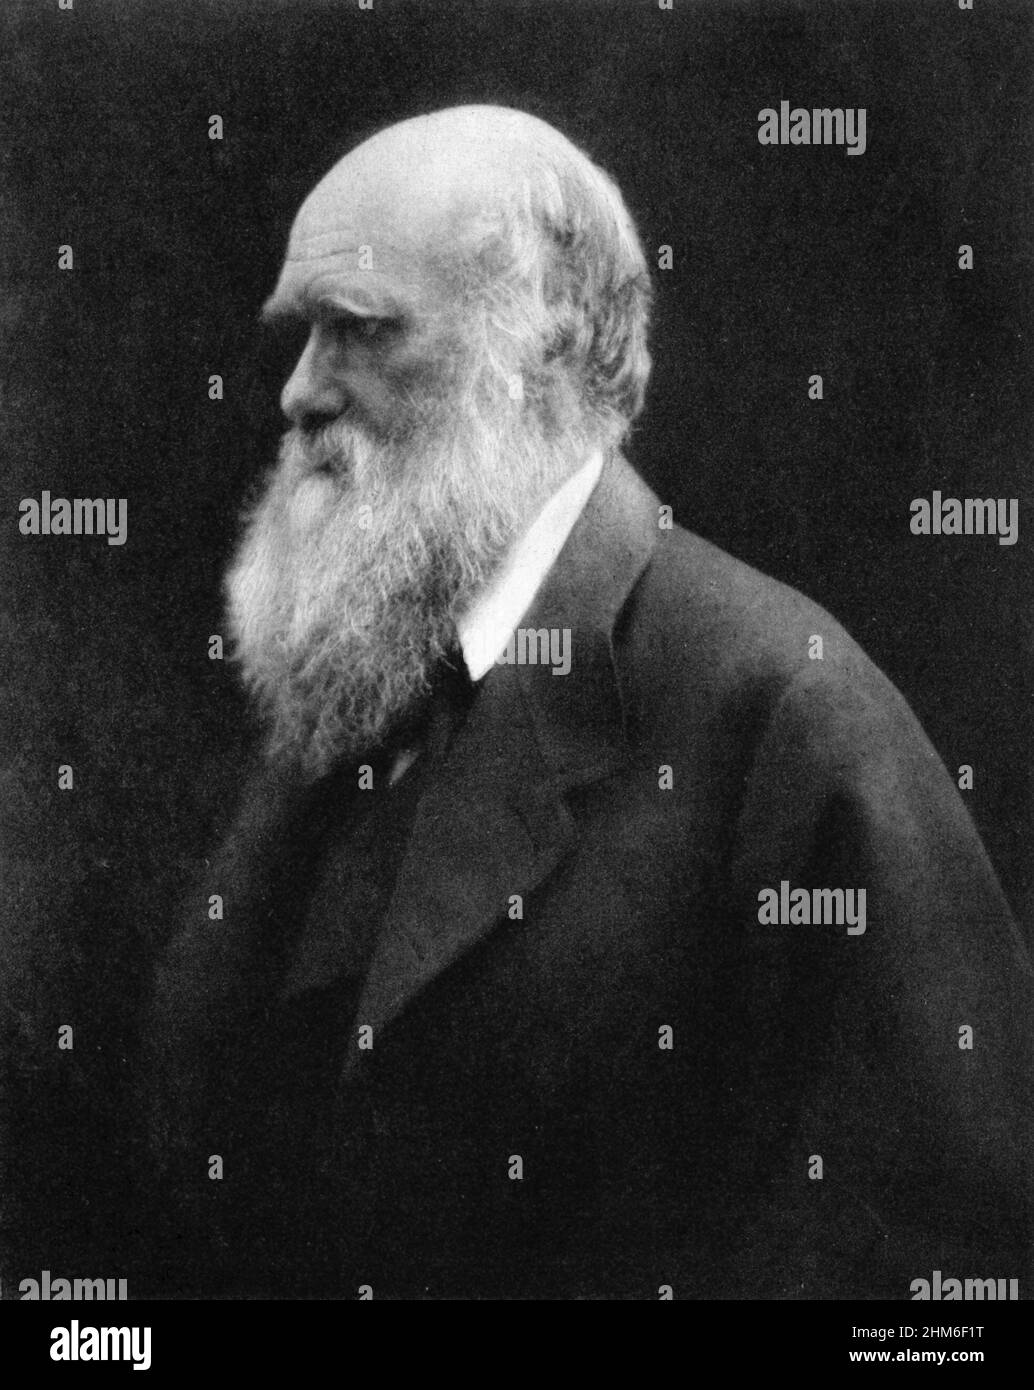 A portrait of the English writer and founder of the theory of batural selection, Charles Darwin from 1868 when he was 57 yrs old. Stock Photo